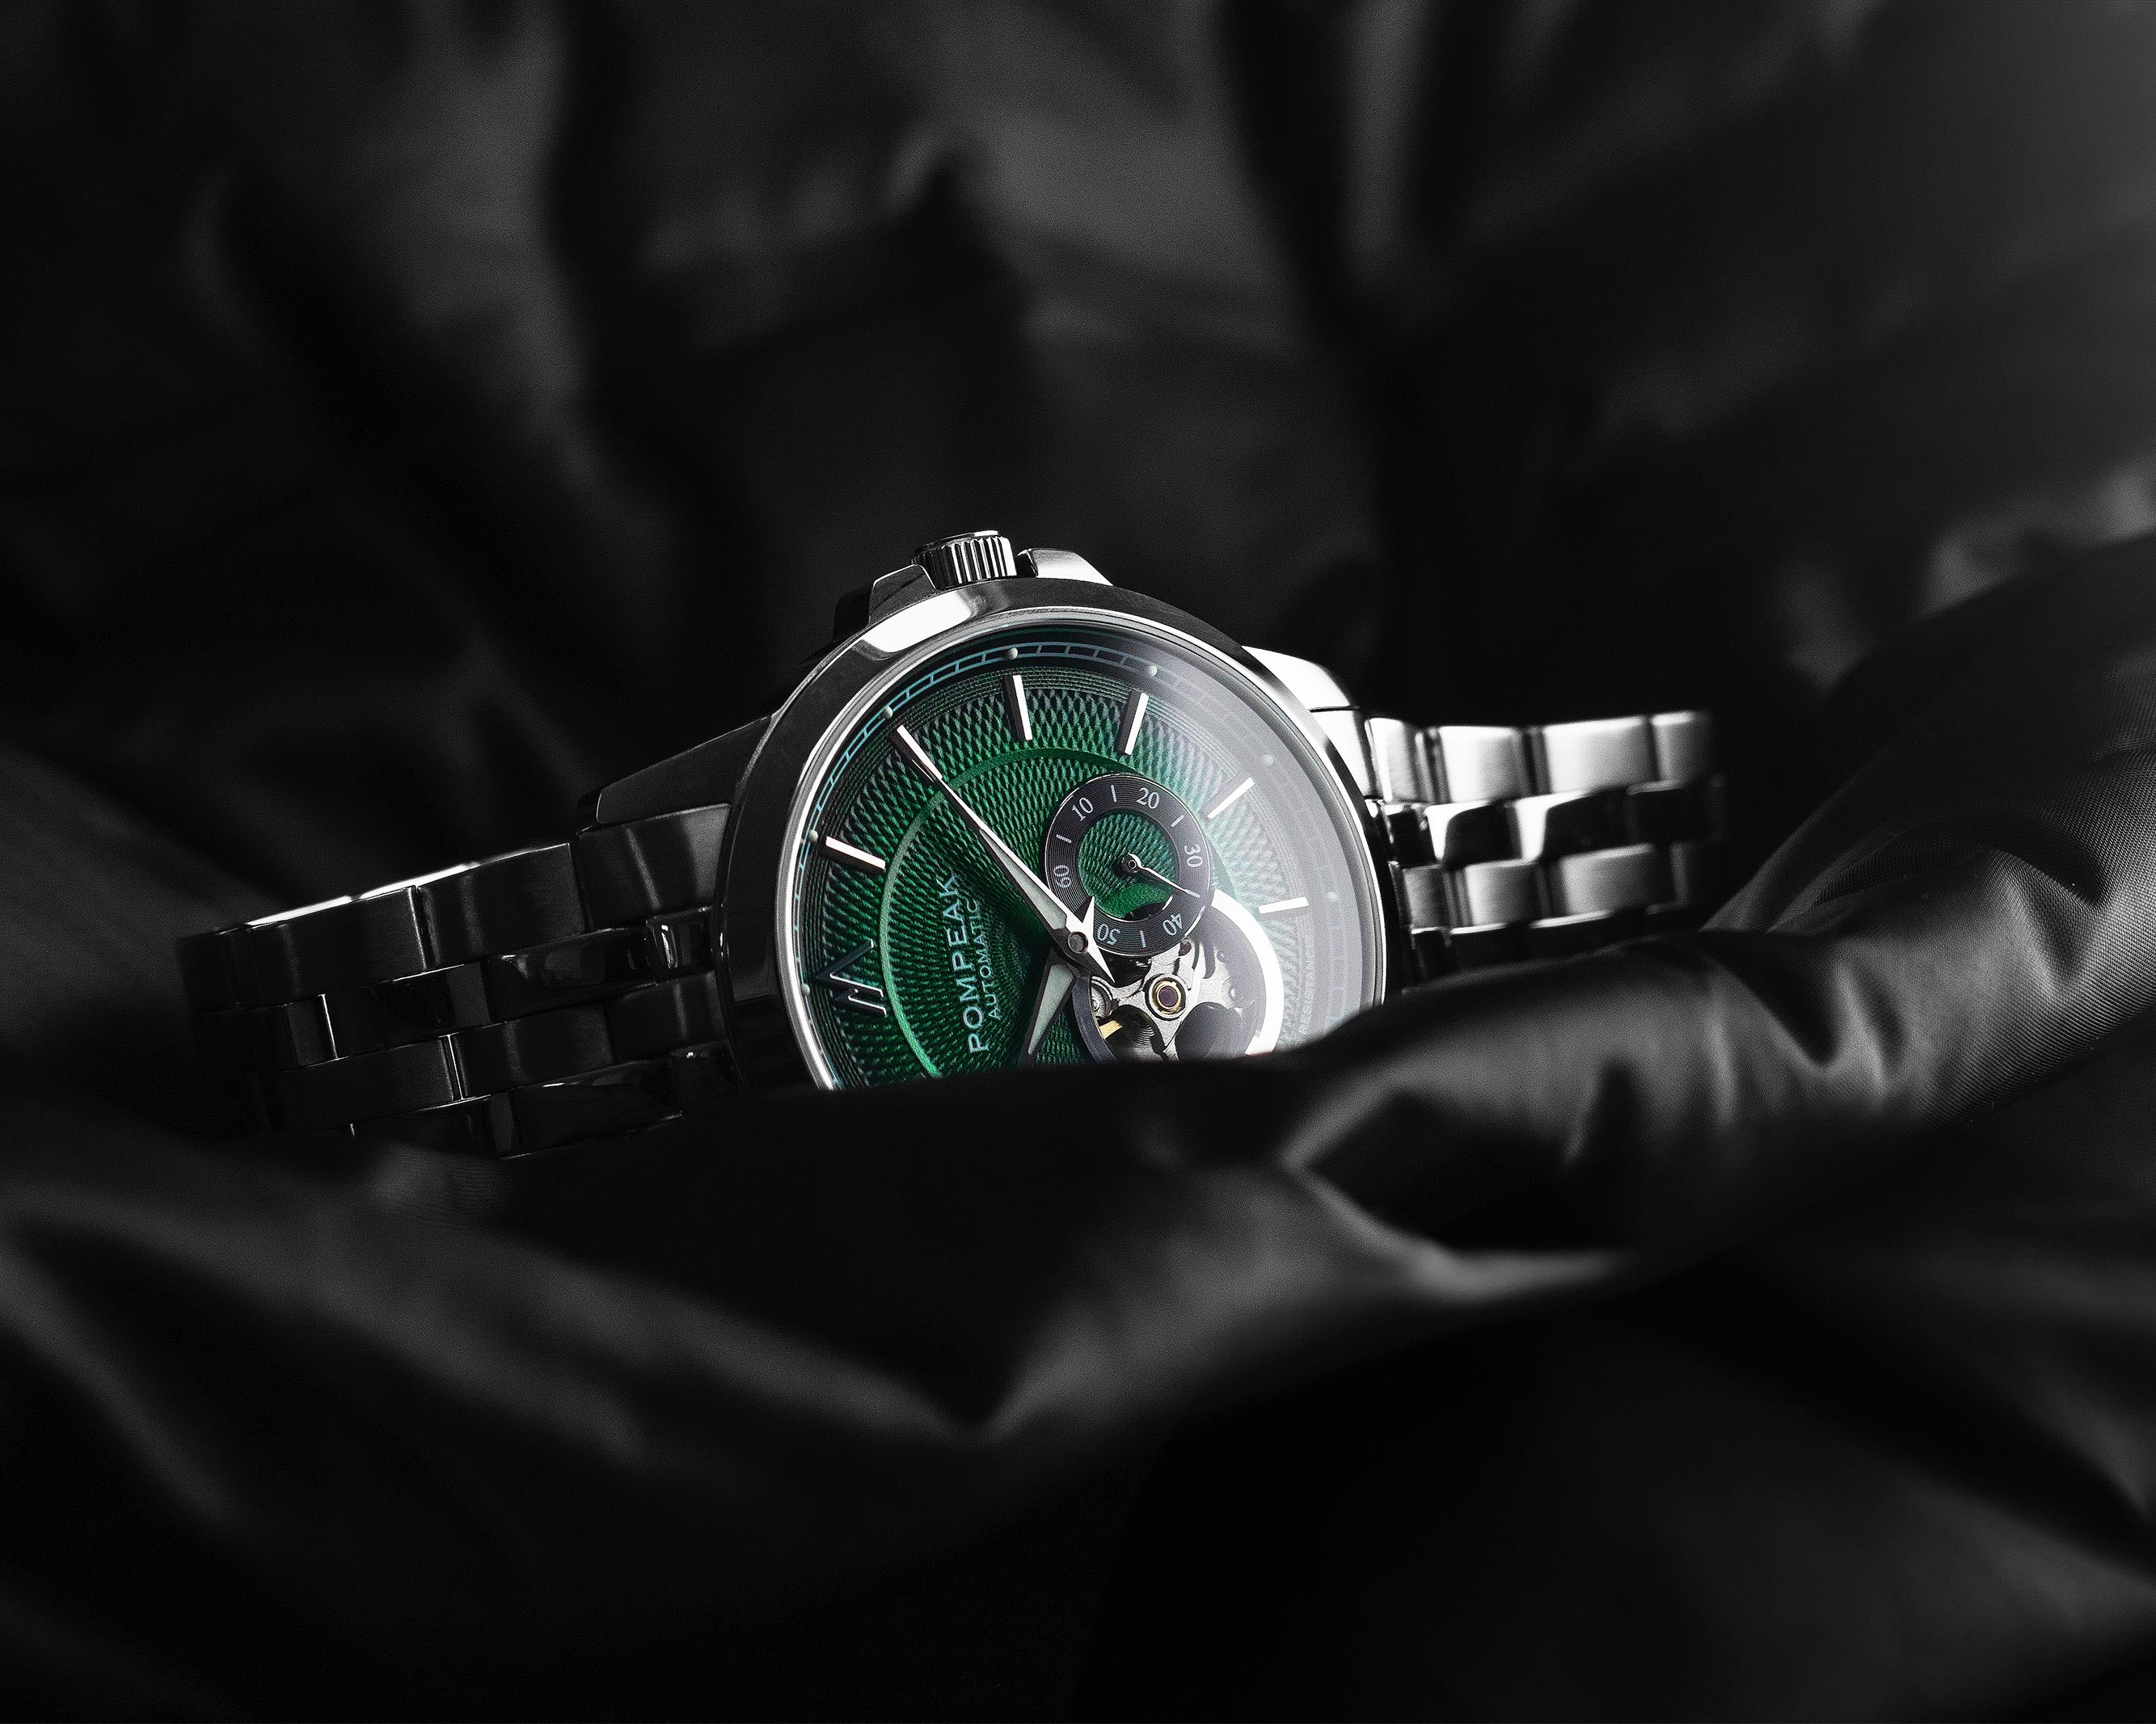 An exquisite shot of the British Racing Green edition watch, emphasizing its rich green hue and intricate dial pattern.